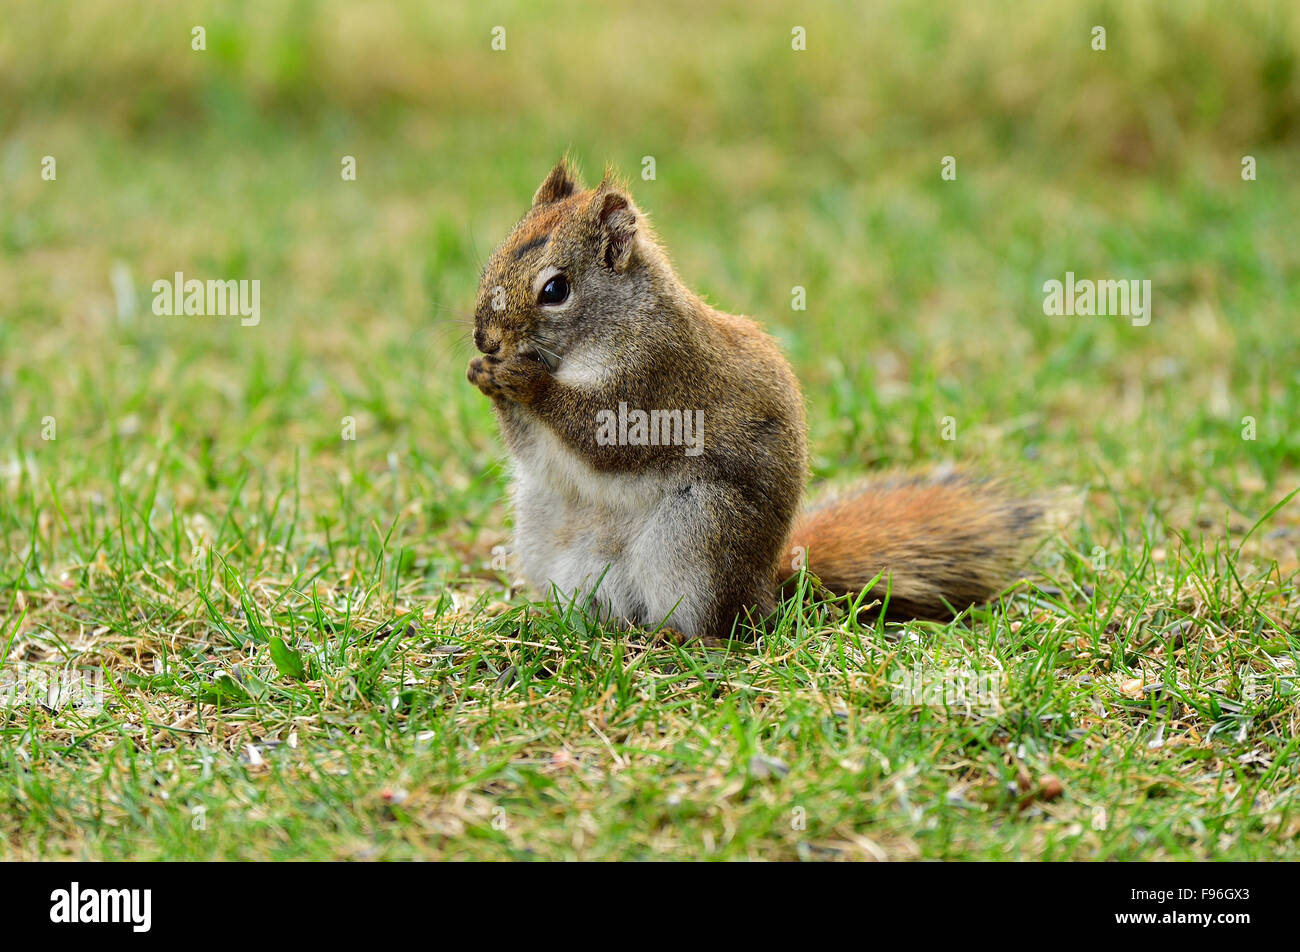 An image of a red squirrel, Tamiasciurus hudsonicus, sitting  on the green grass of spring feeding on some seeds in rural Stock Photo